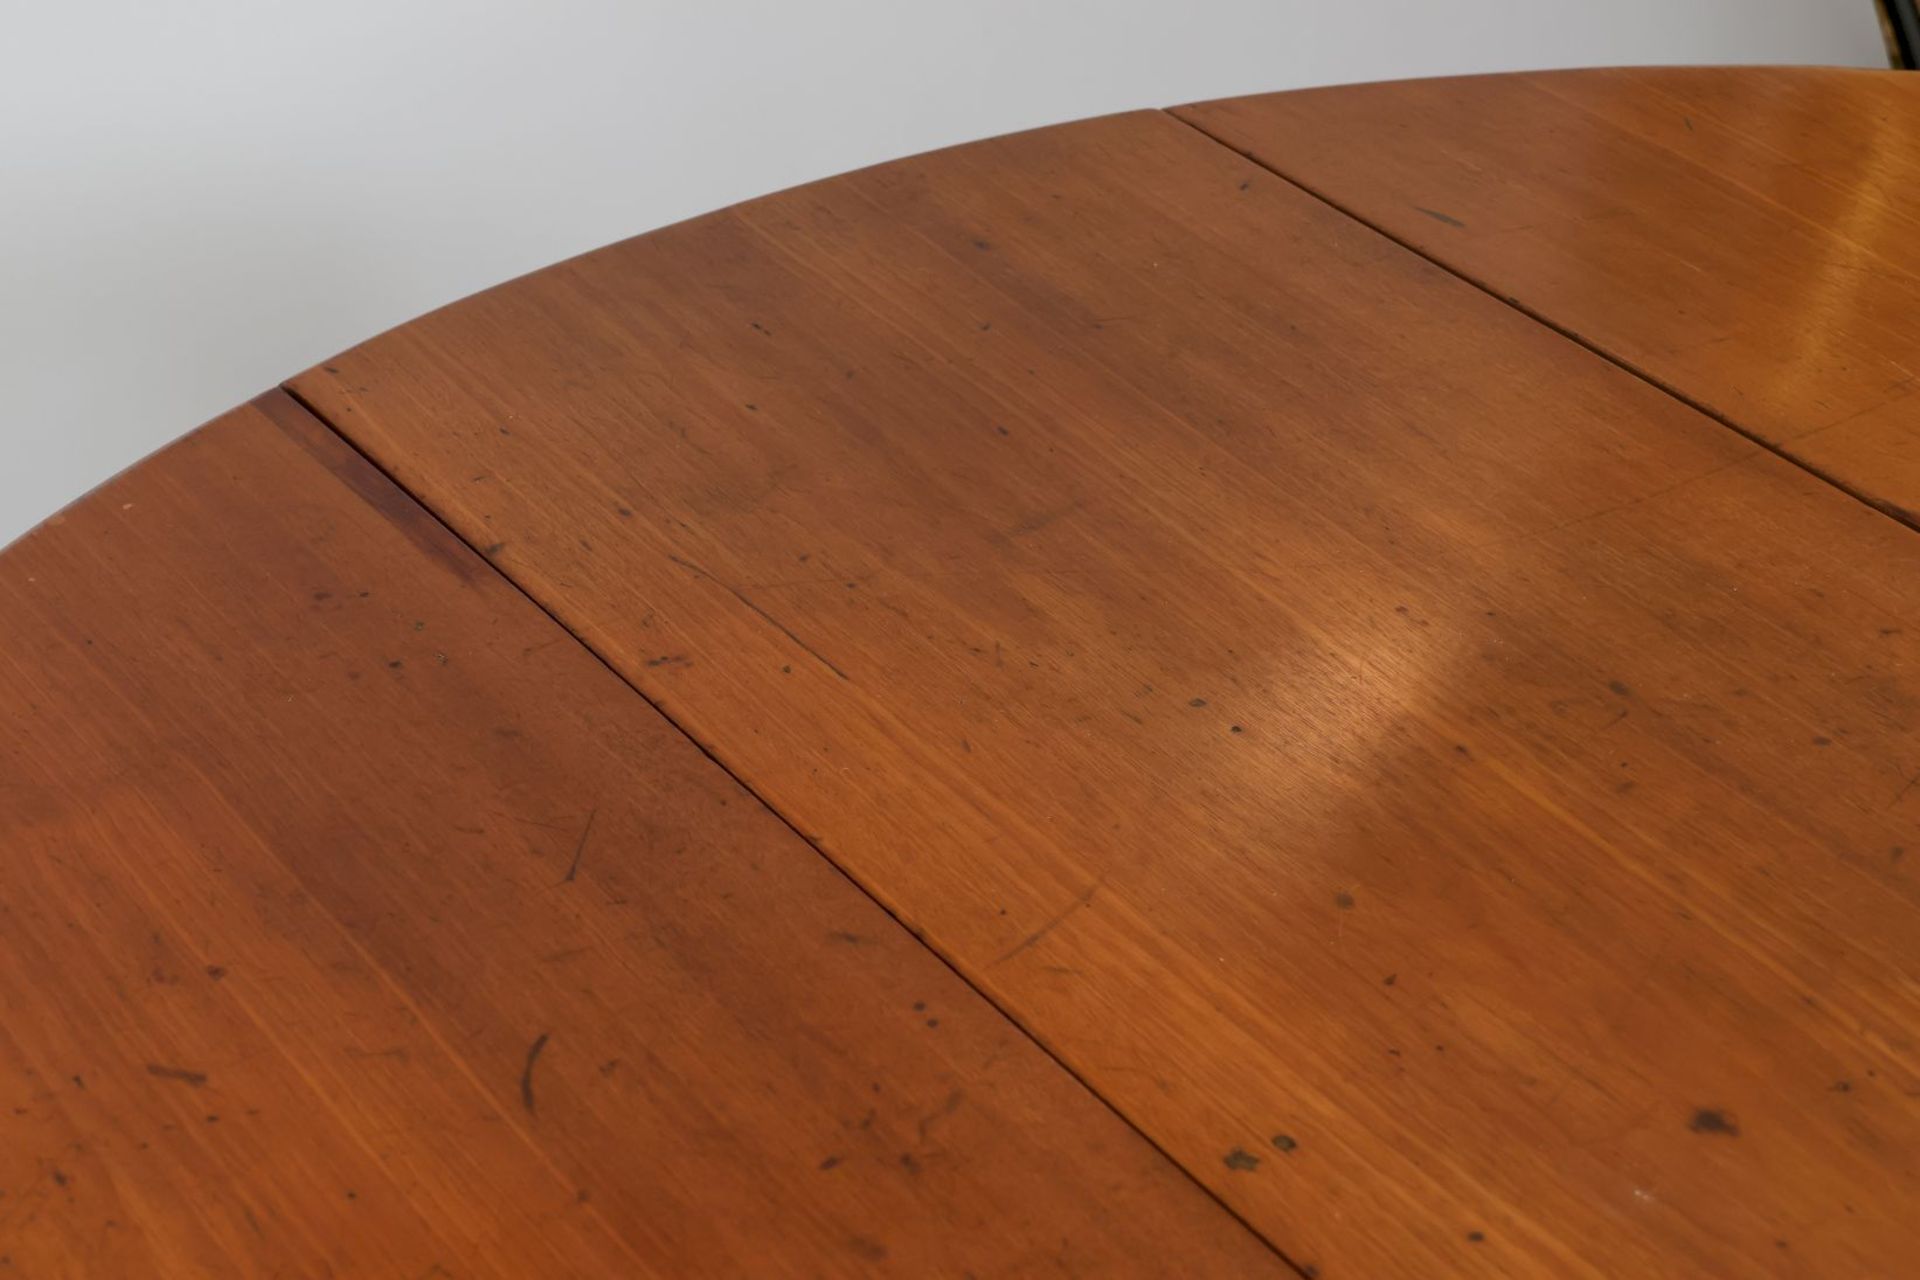 Englischer drop-leaf table - Image 3 of 3